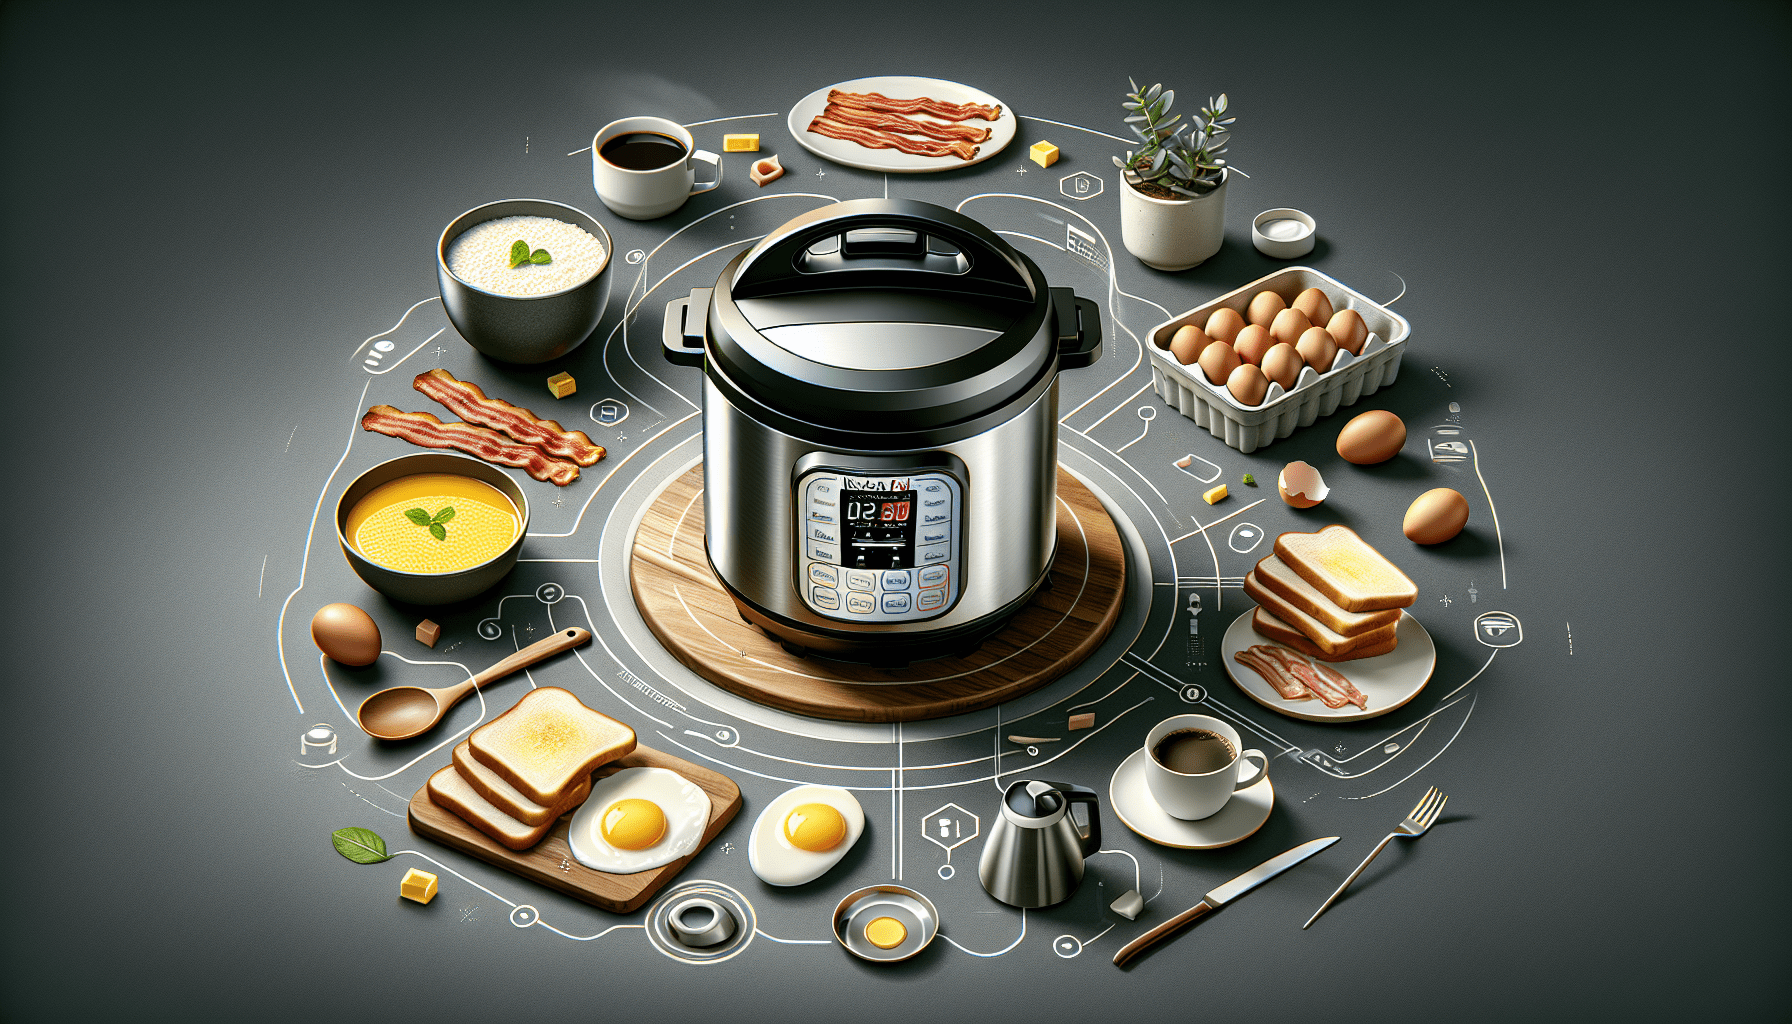 How Do I Make Breakfast In An Instant Pot?